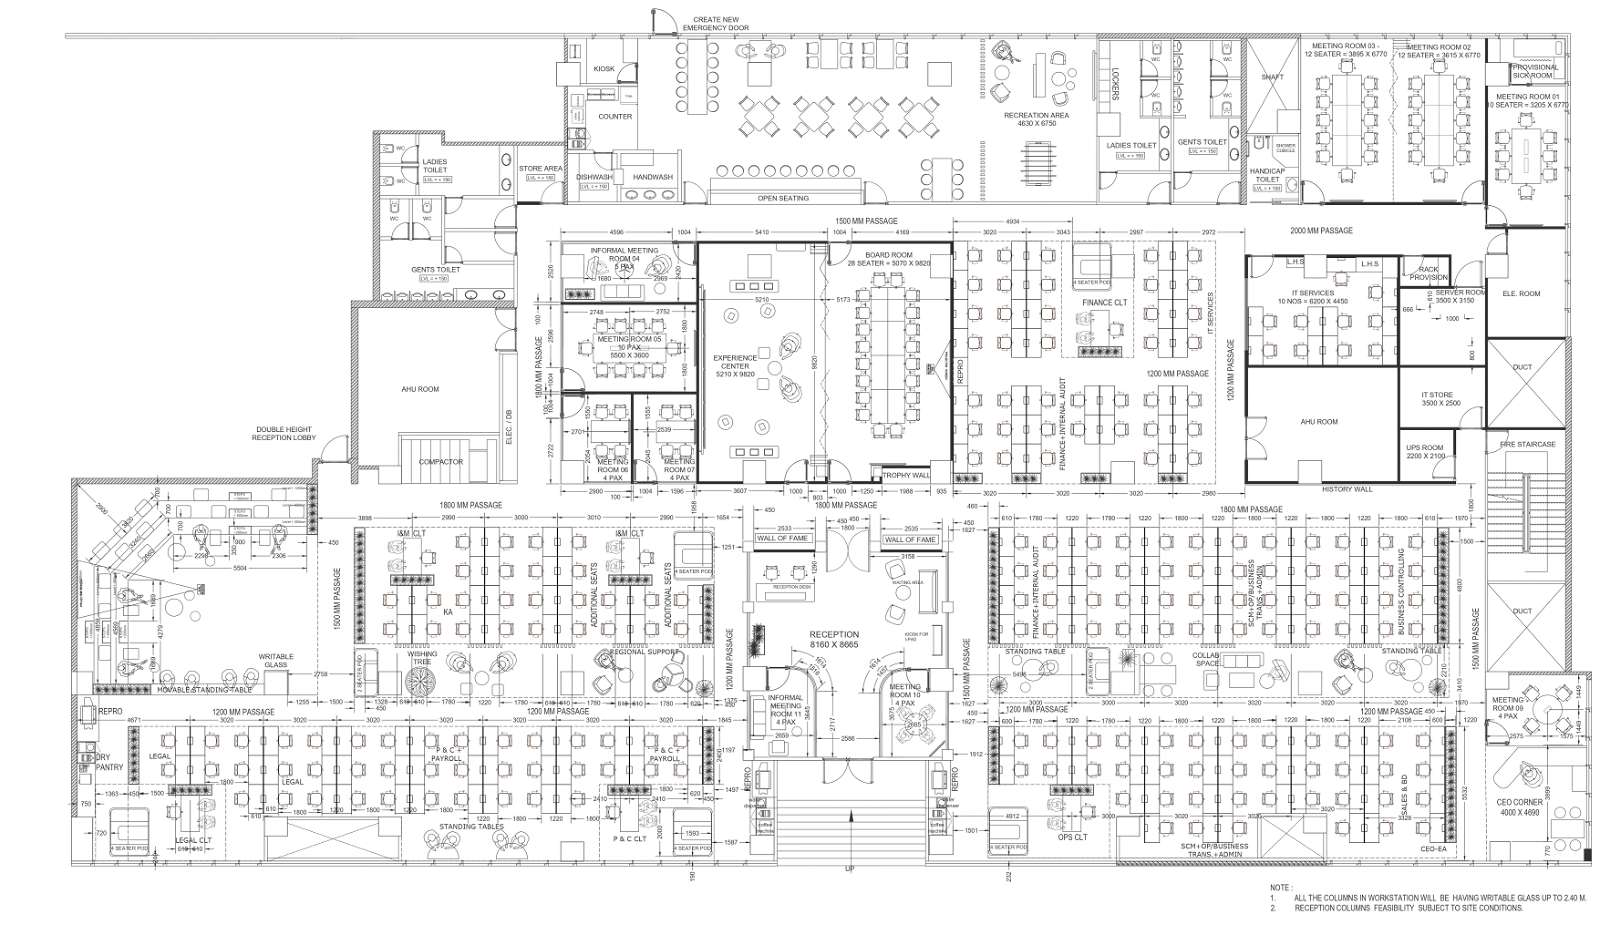 Corporate Office Building Furniture Layout Detail Plan DWG AutoCAD File Cadbull